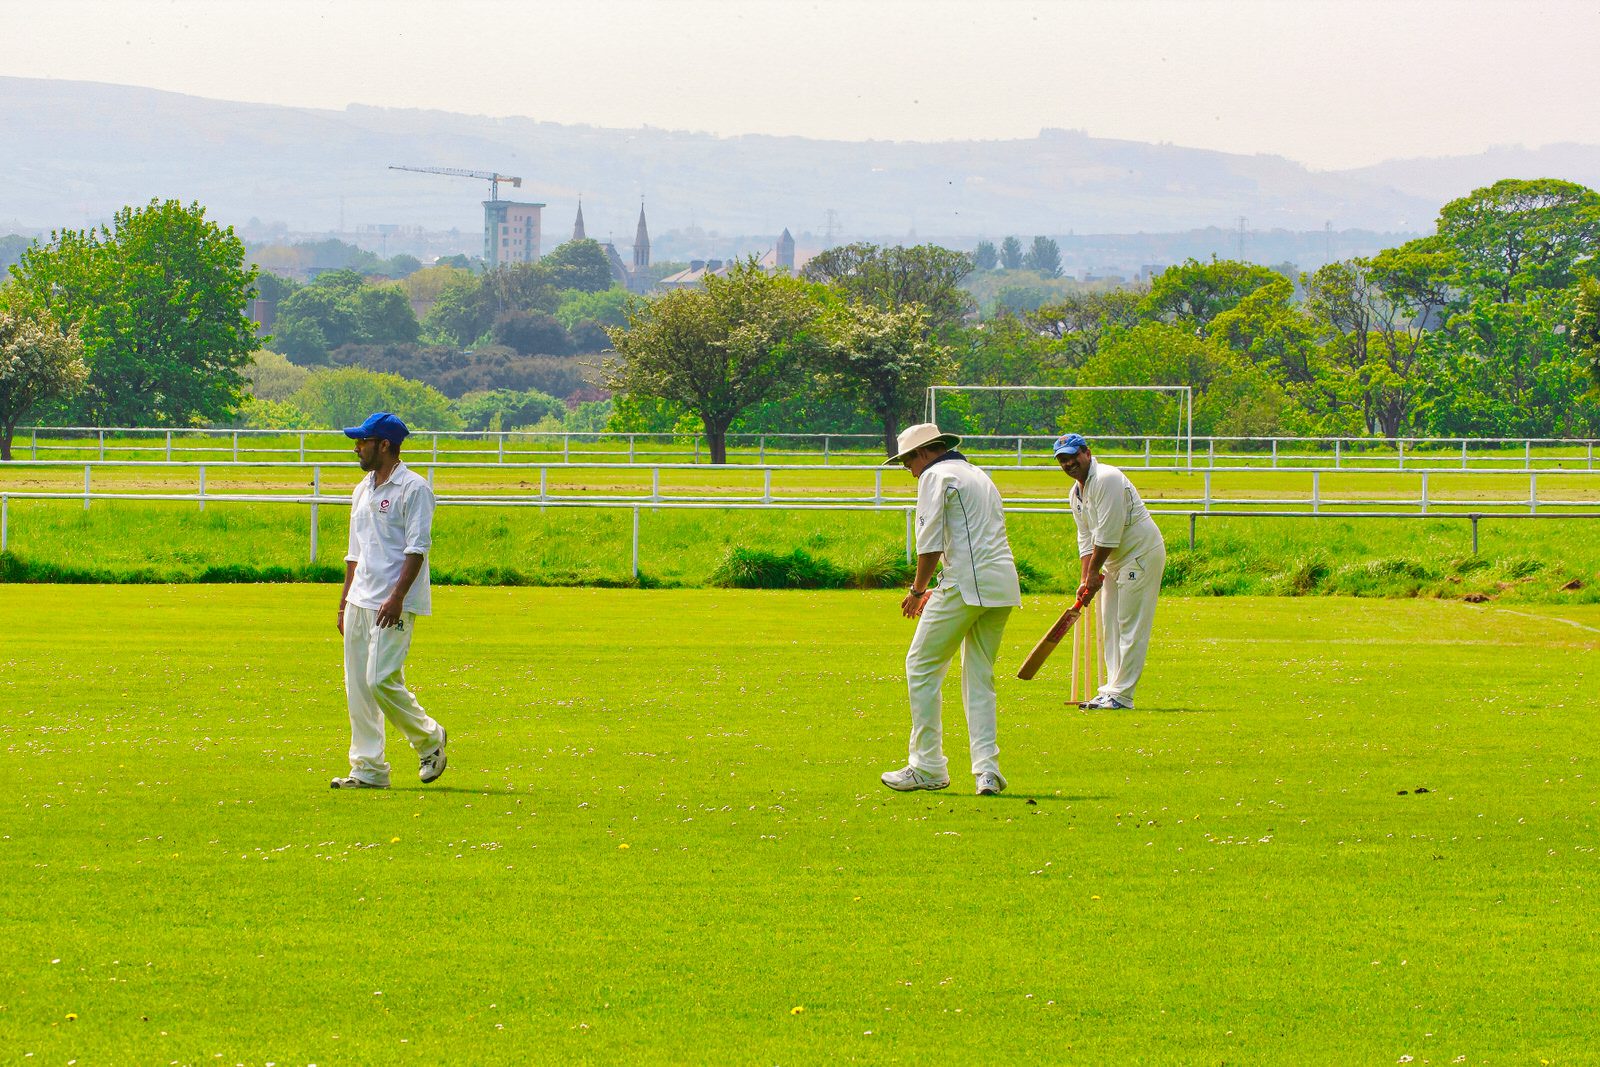 TWO CRICKET CLUBS IN PHOENIX PARK NEAR THE WELLINGTON MONUMENT 004